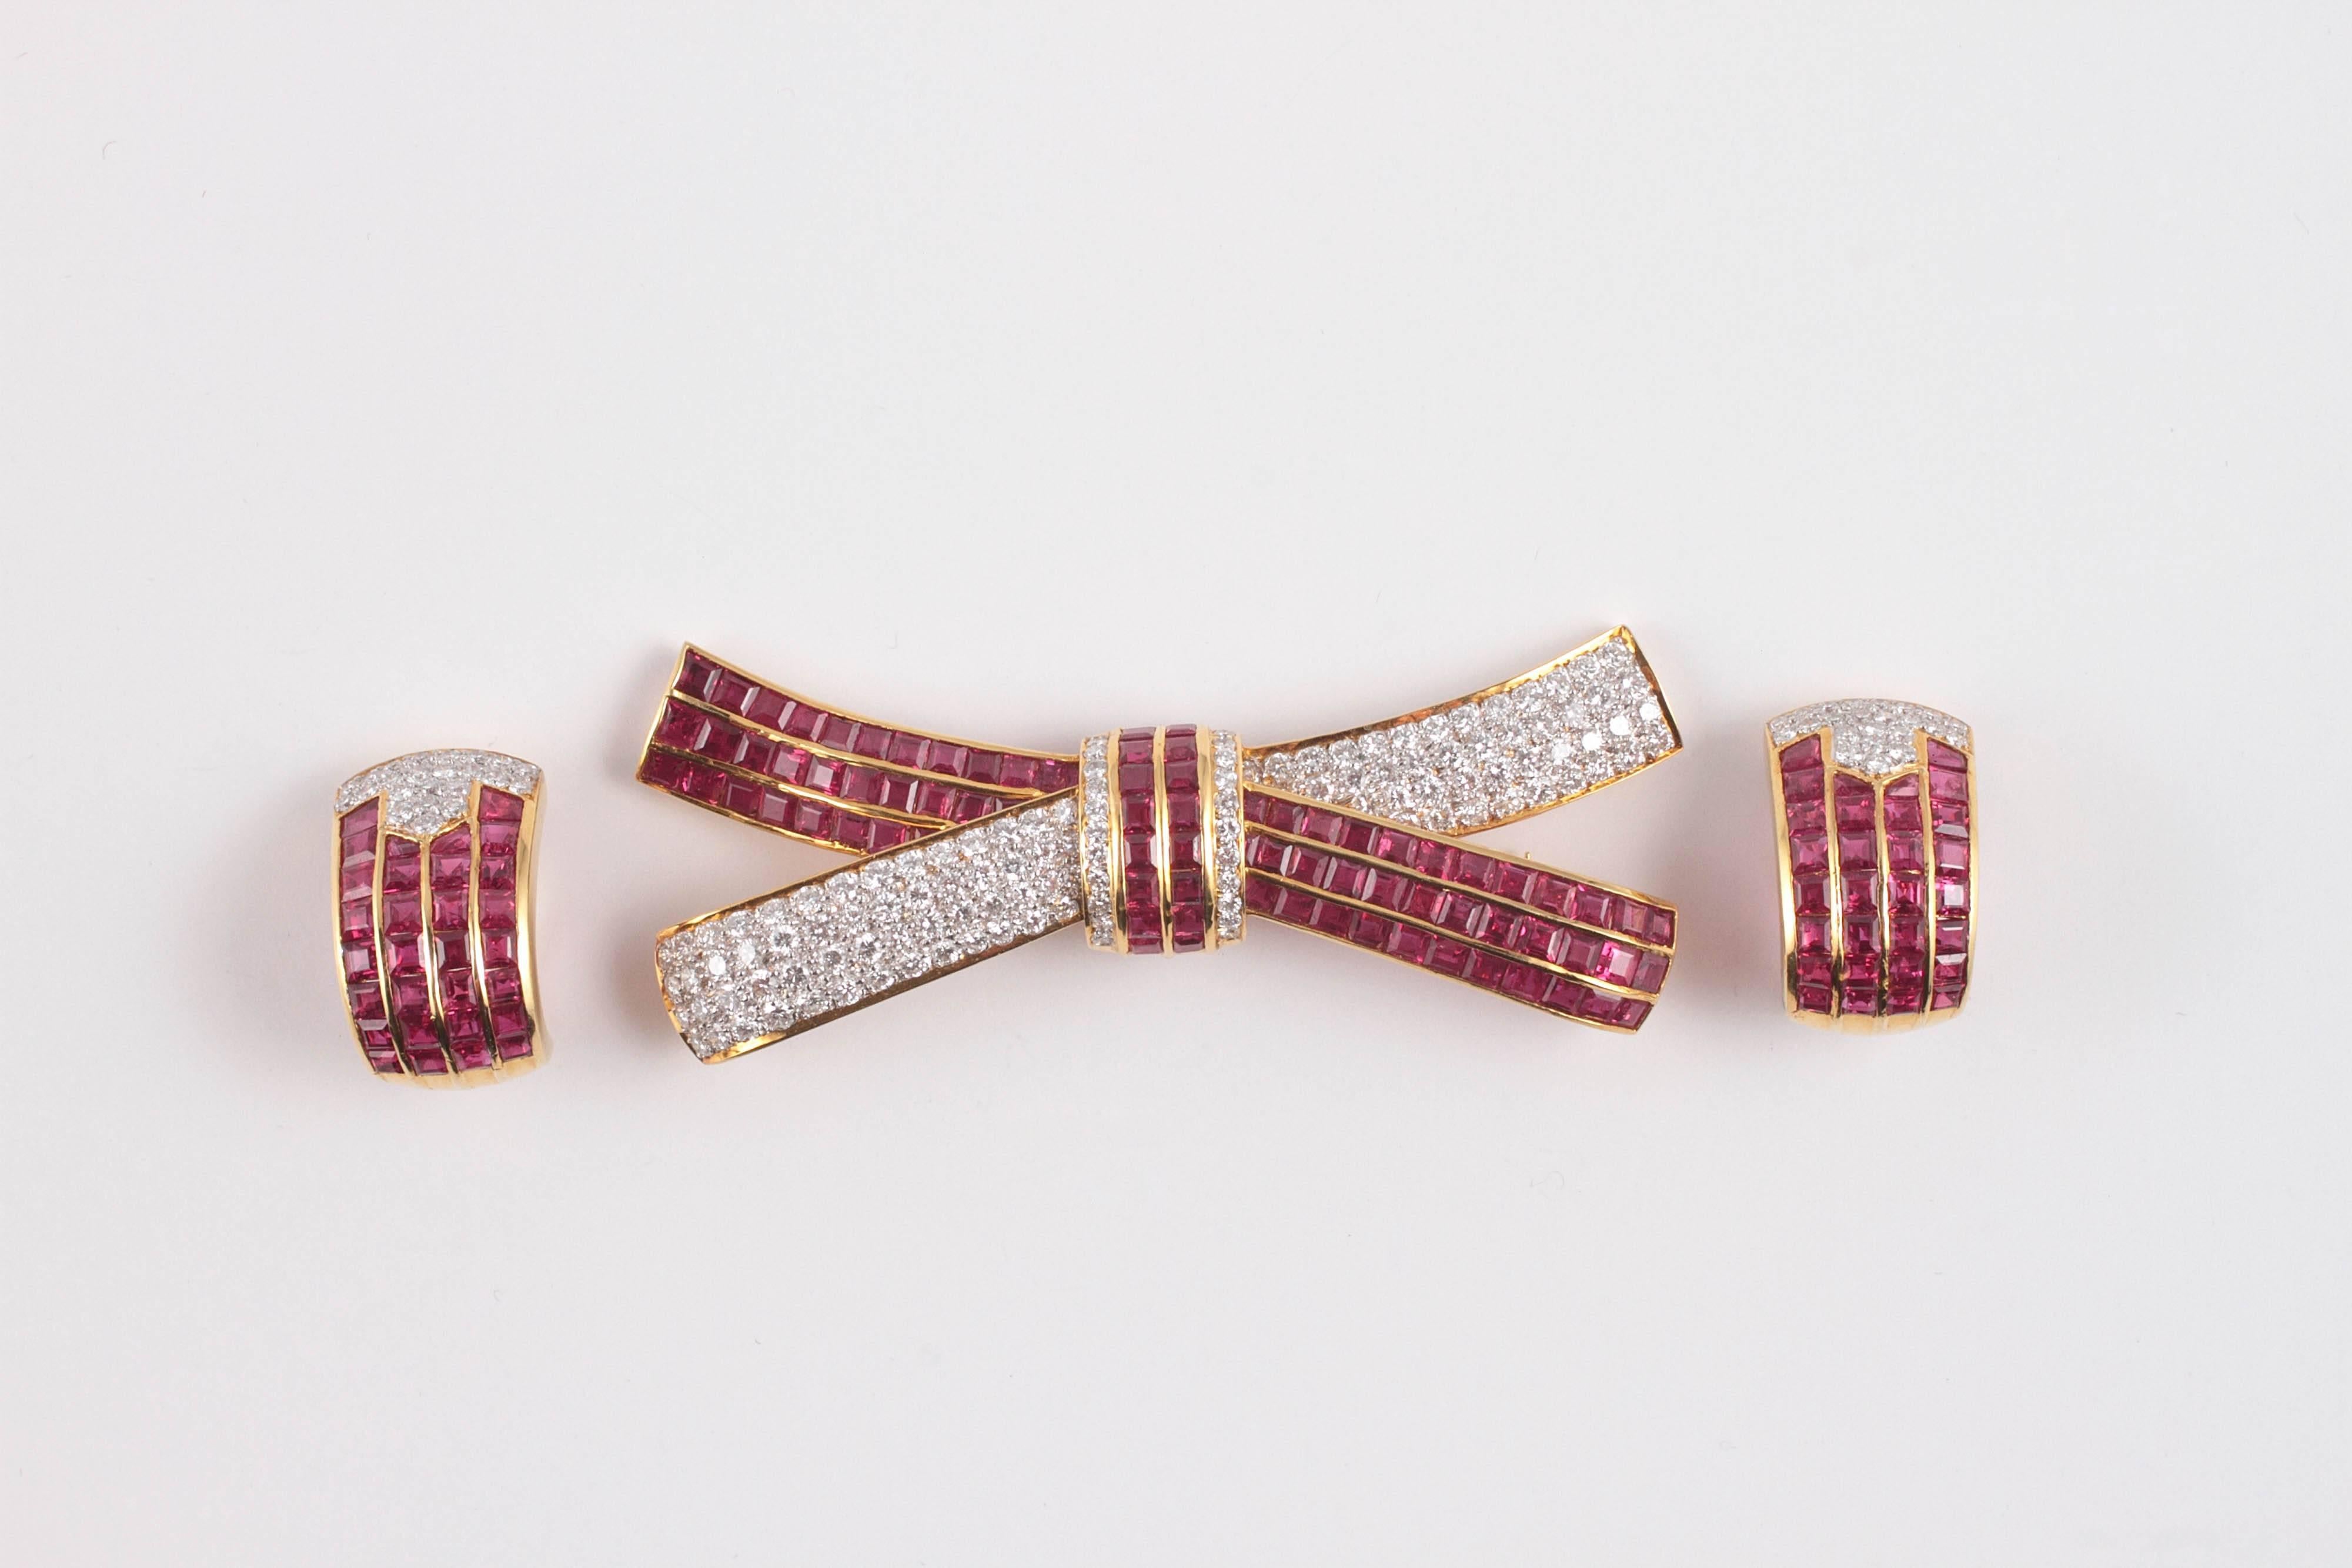  Ruby diamond brooch with matching earrings 2